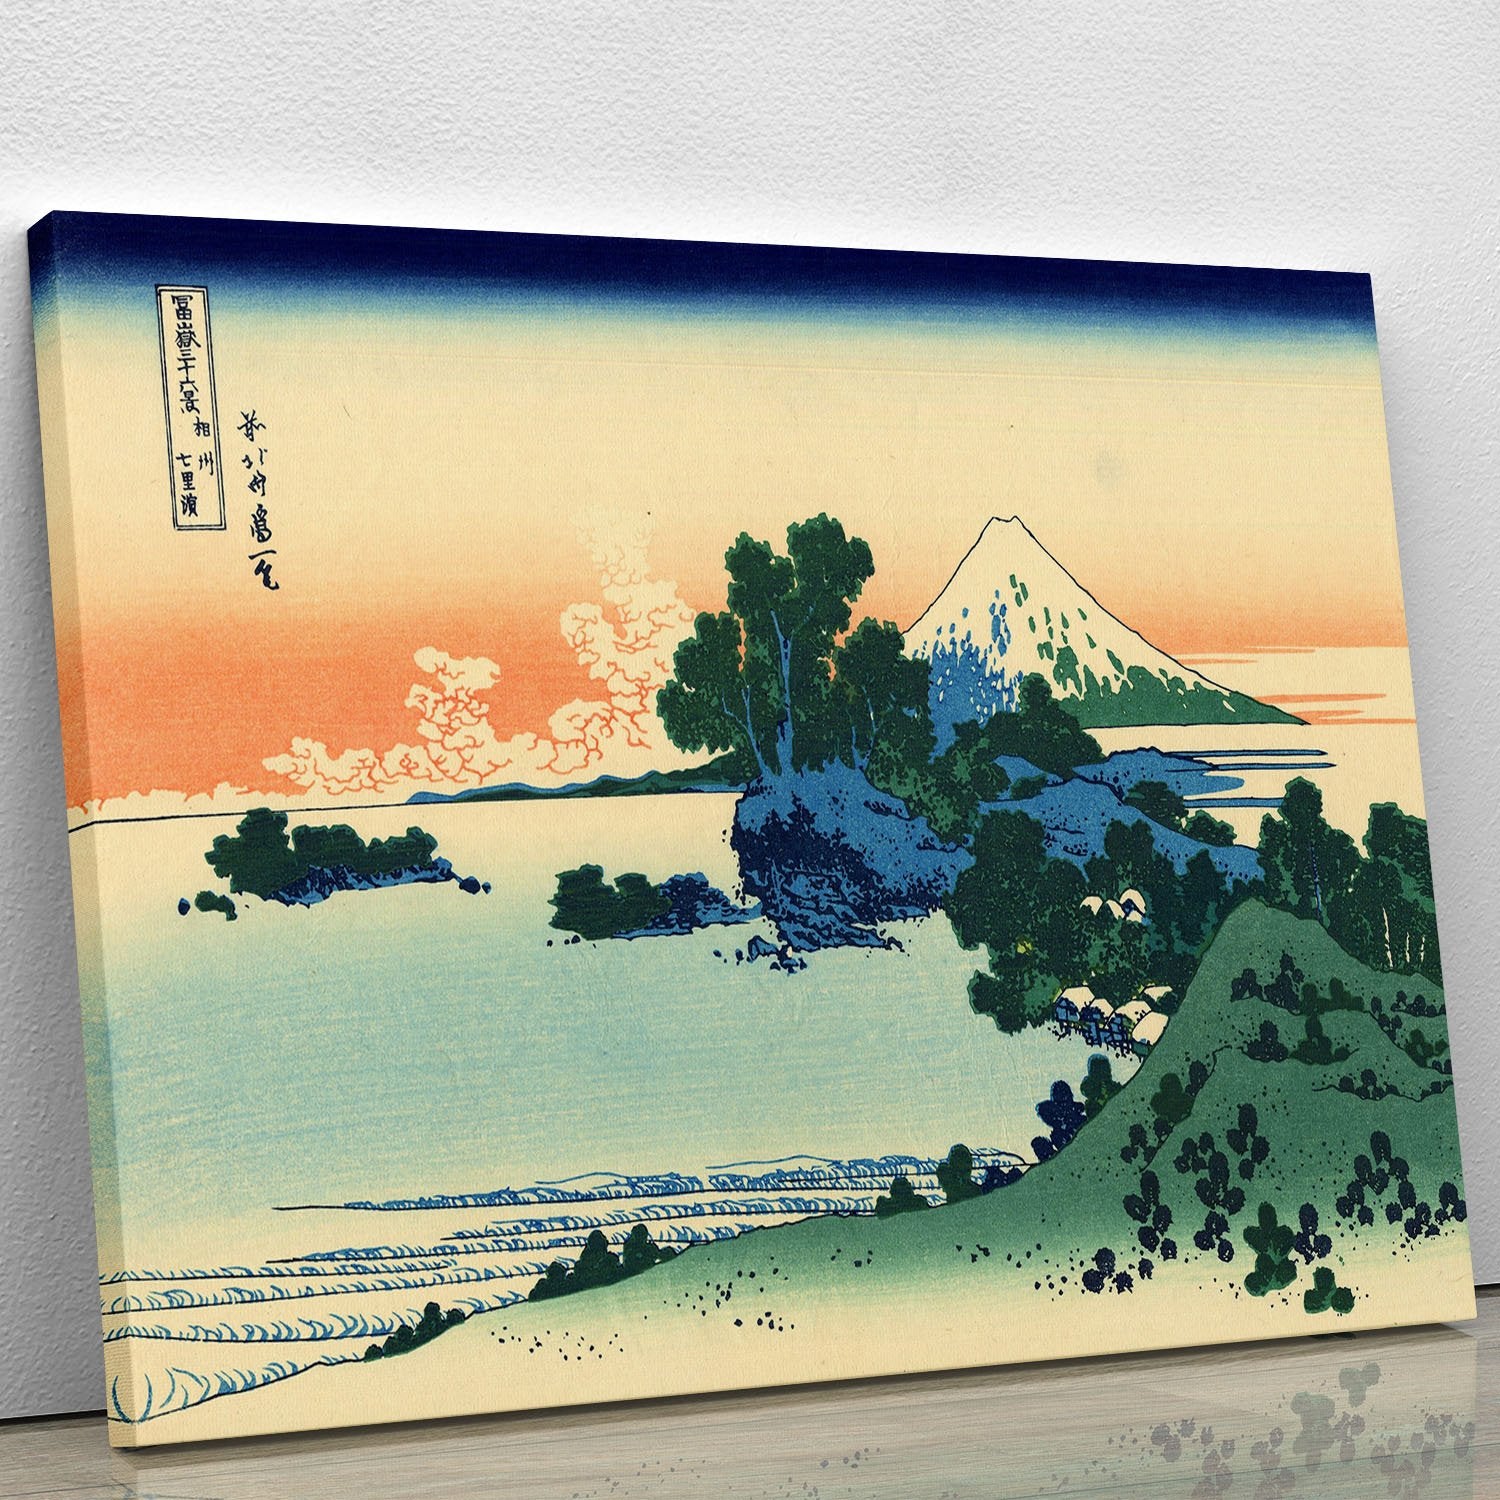 Shichiri beach in Sagami province by Hokusai Canvas Print or Poster